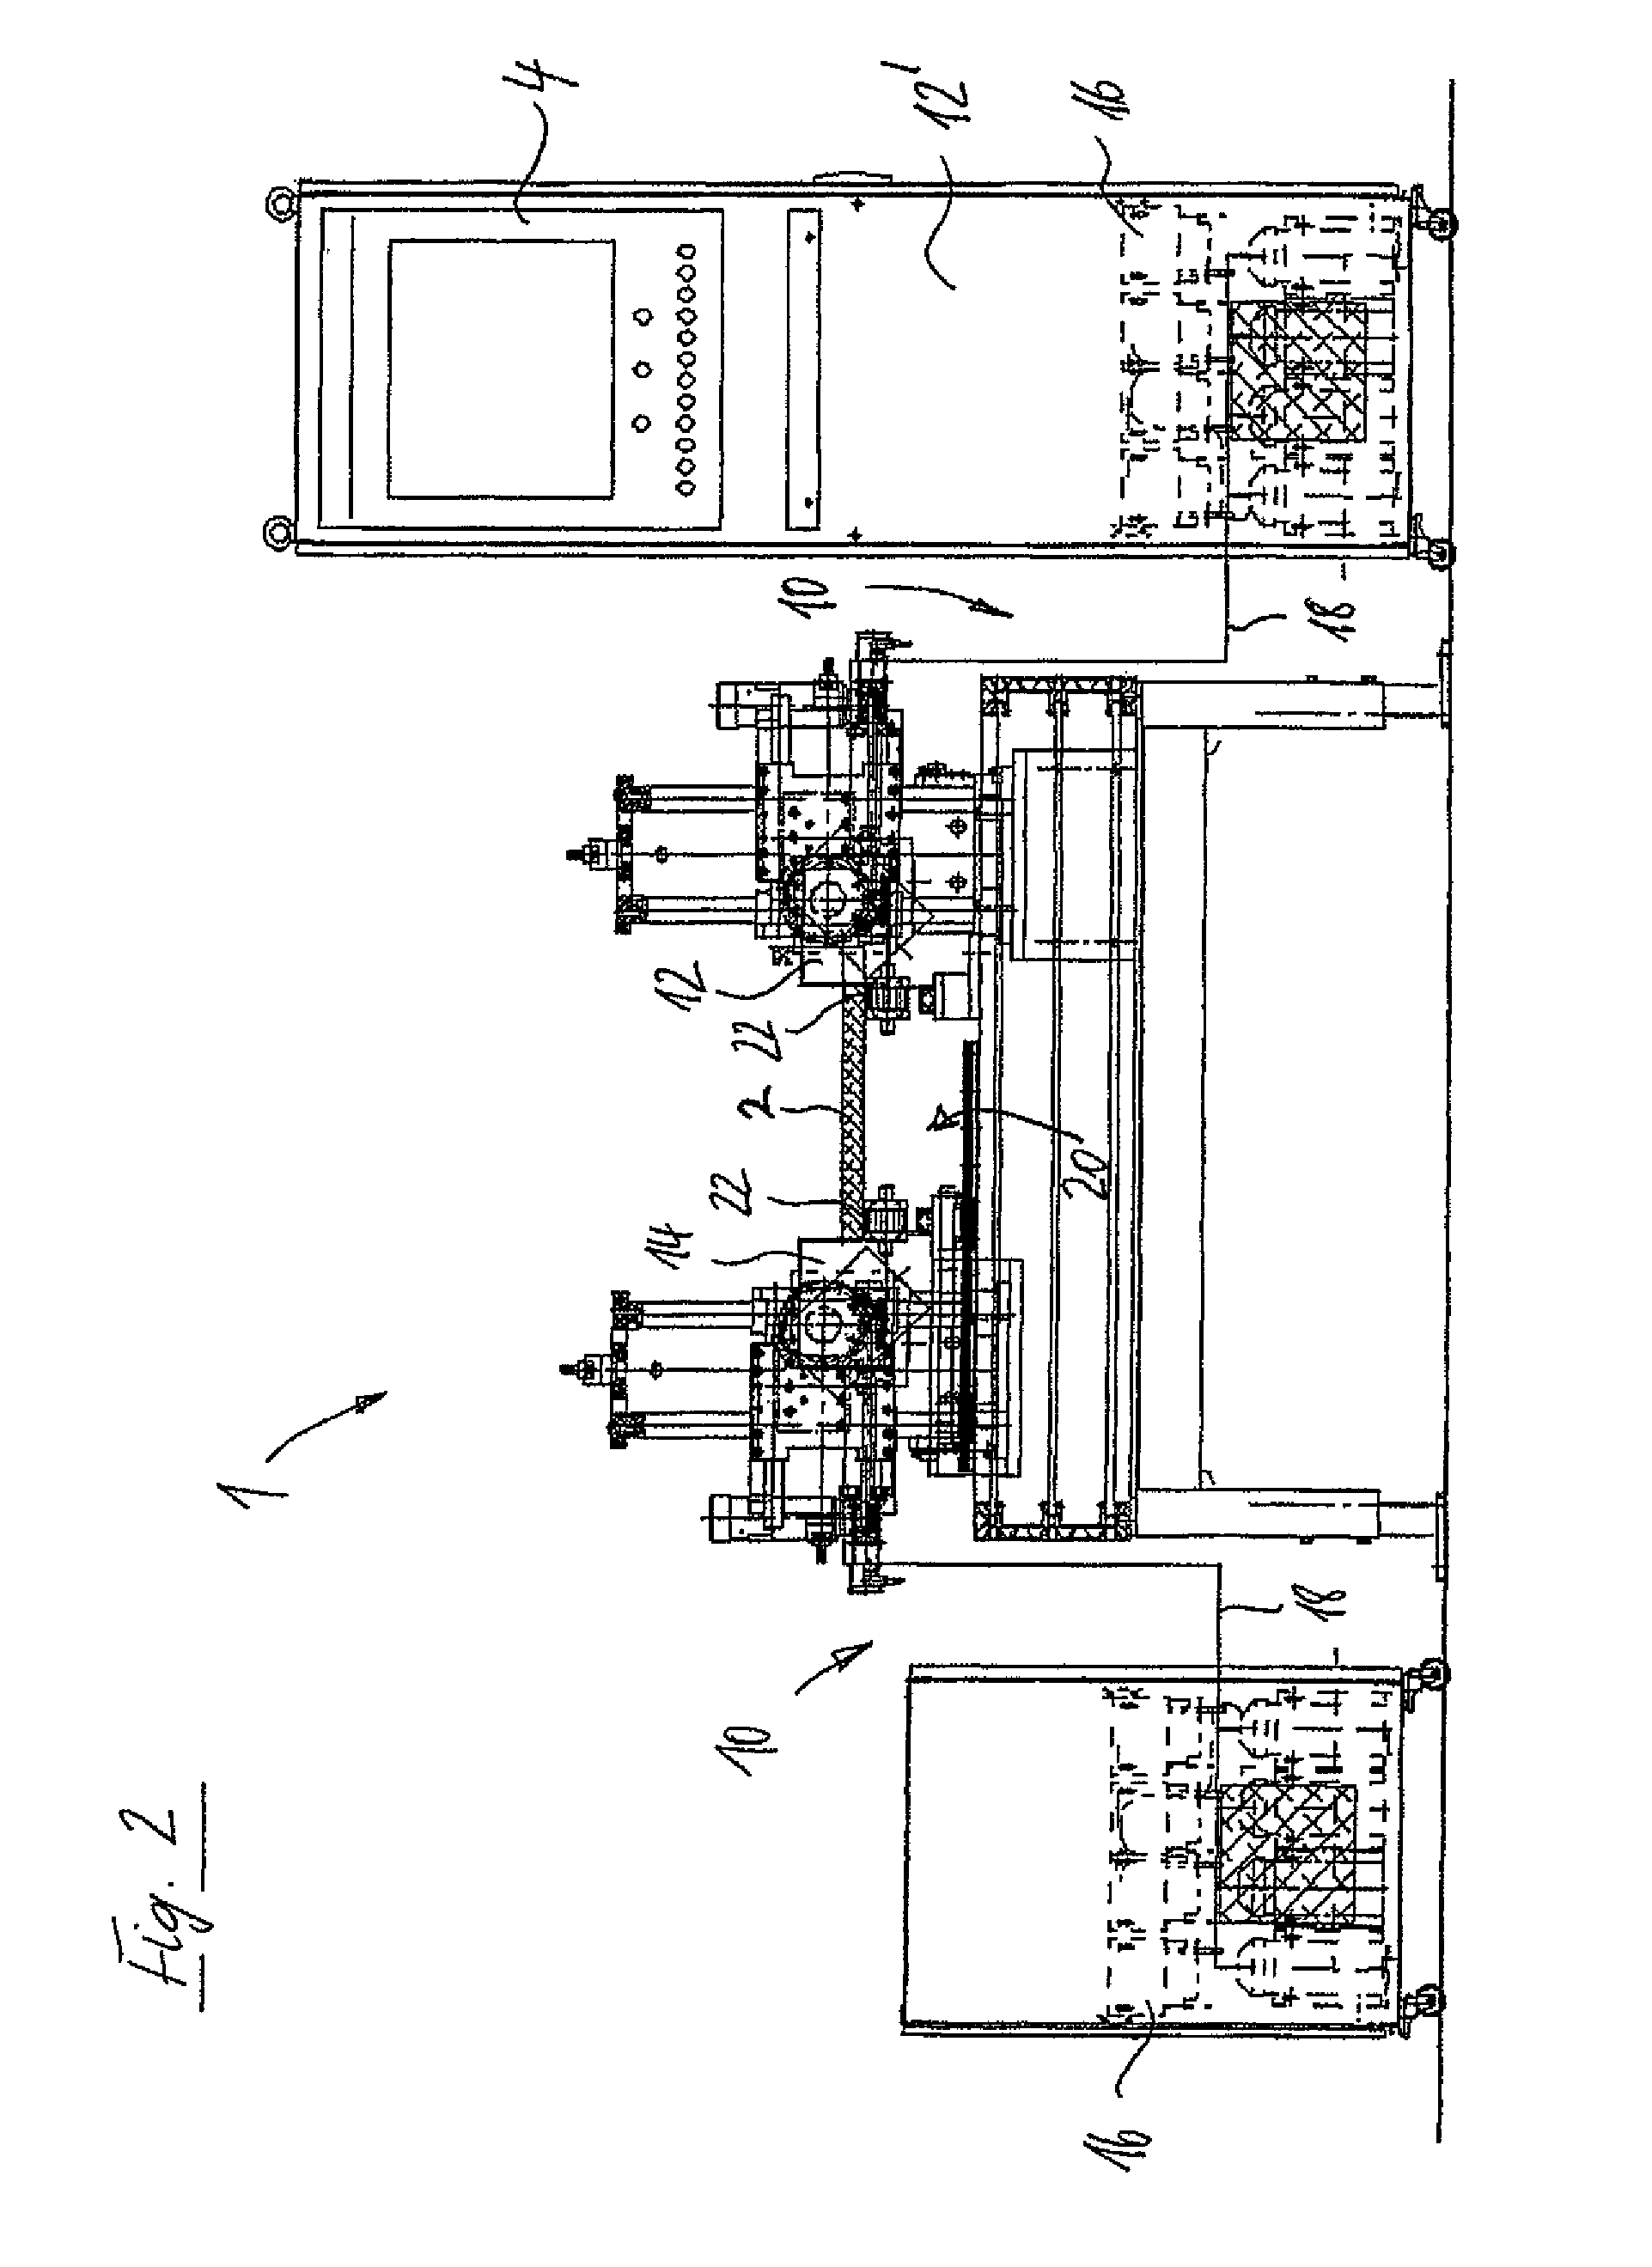 Method for imprinting a three-dimensional article